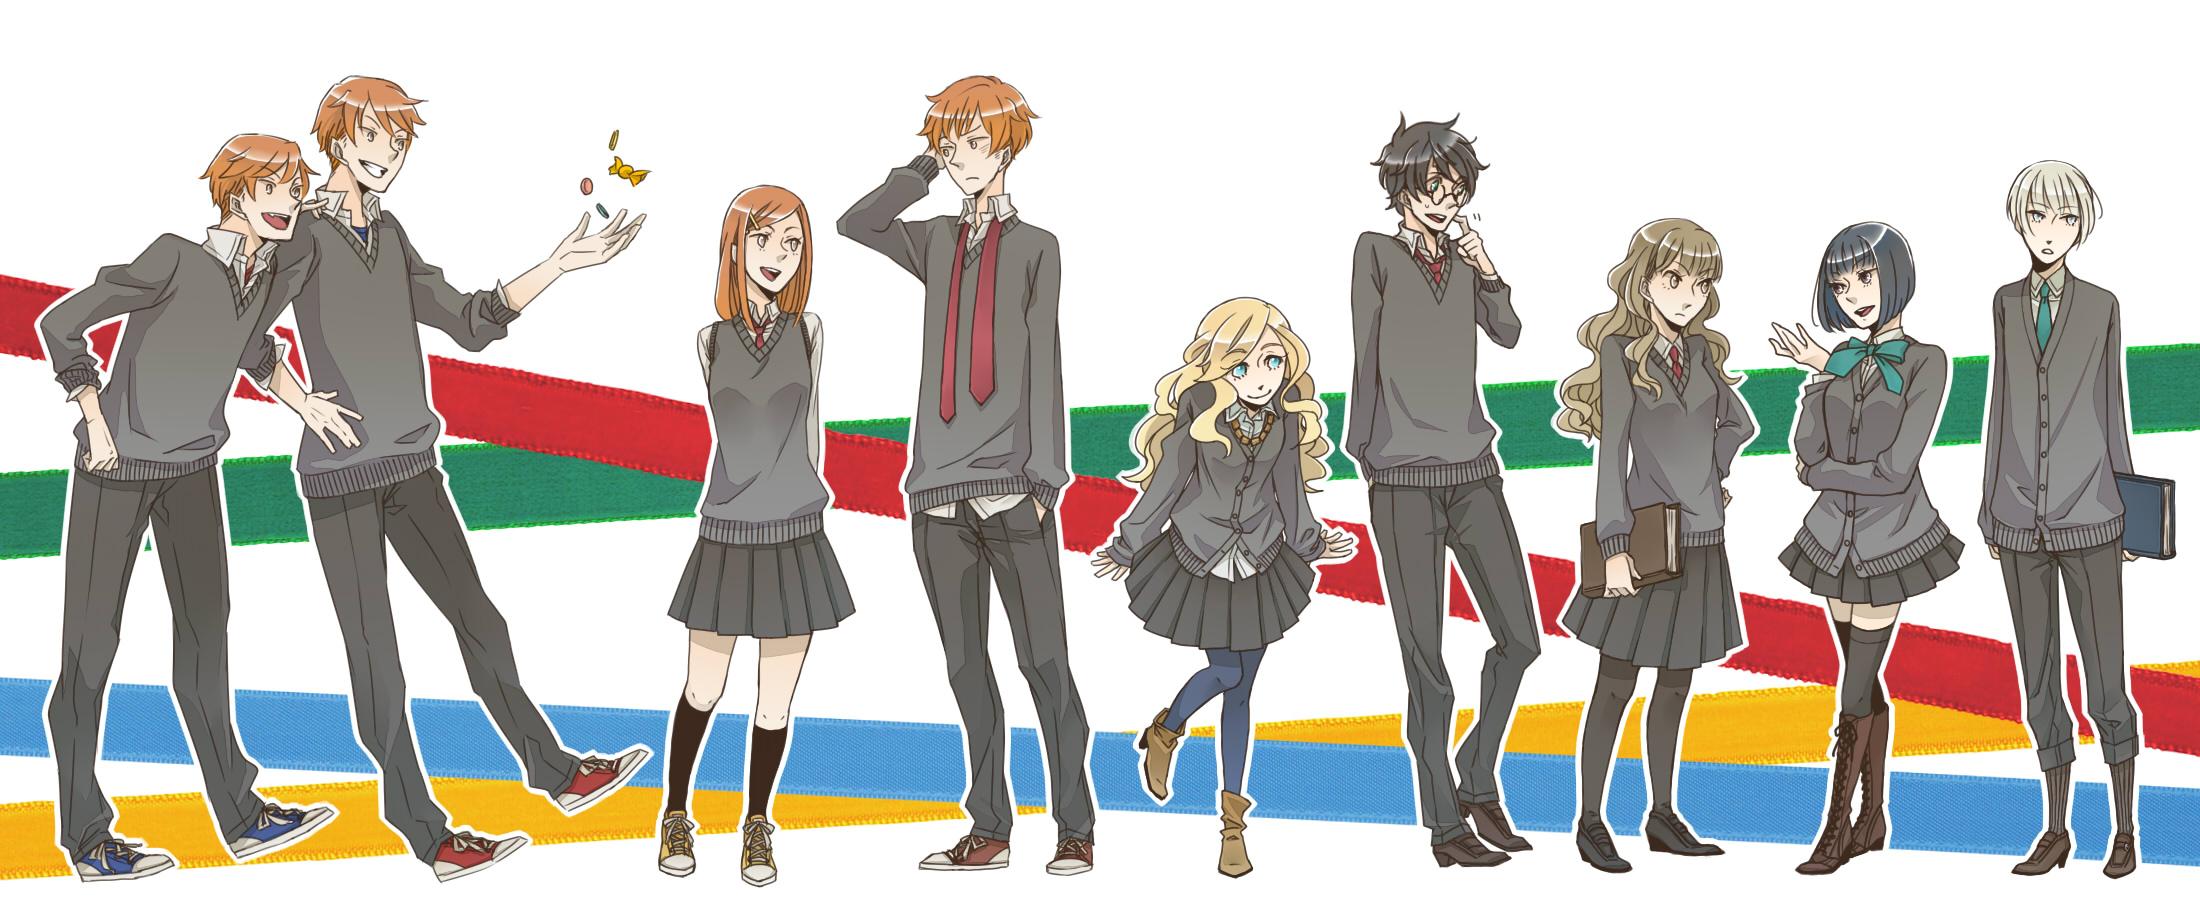 Harry Potter cast goes animestyle in new line of Japanexclusive  merchandise  SoraNews24 Japan News